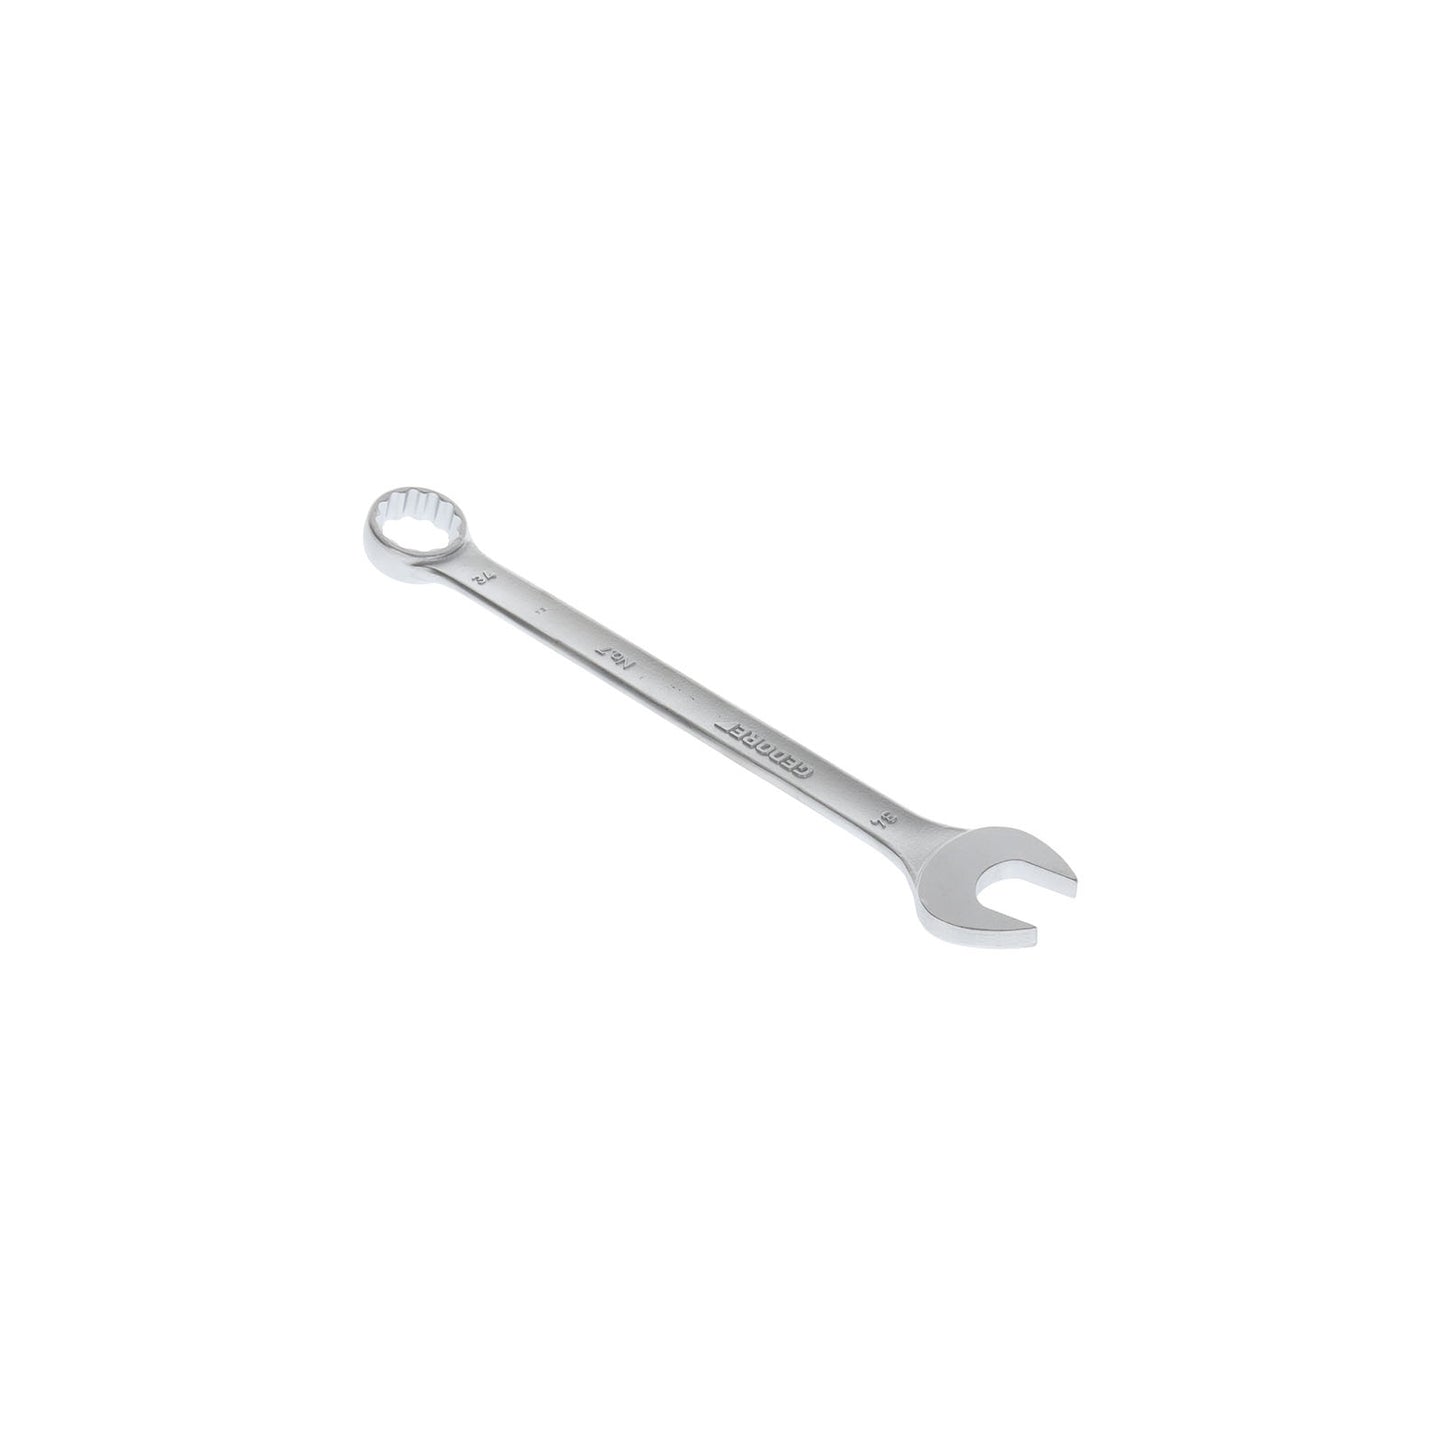 GEDORE 7 34 - Combination Wrench, 34mm (1827987)